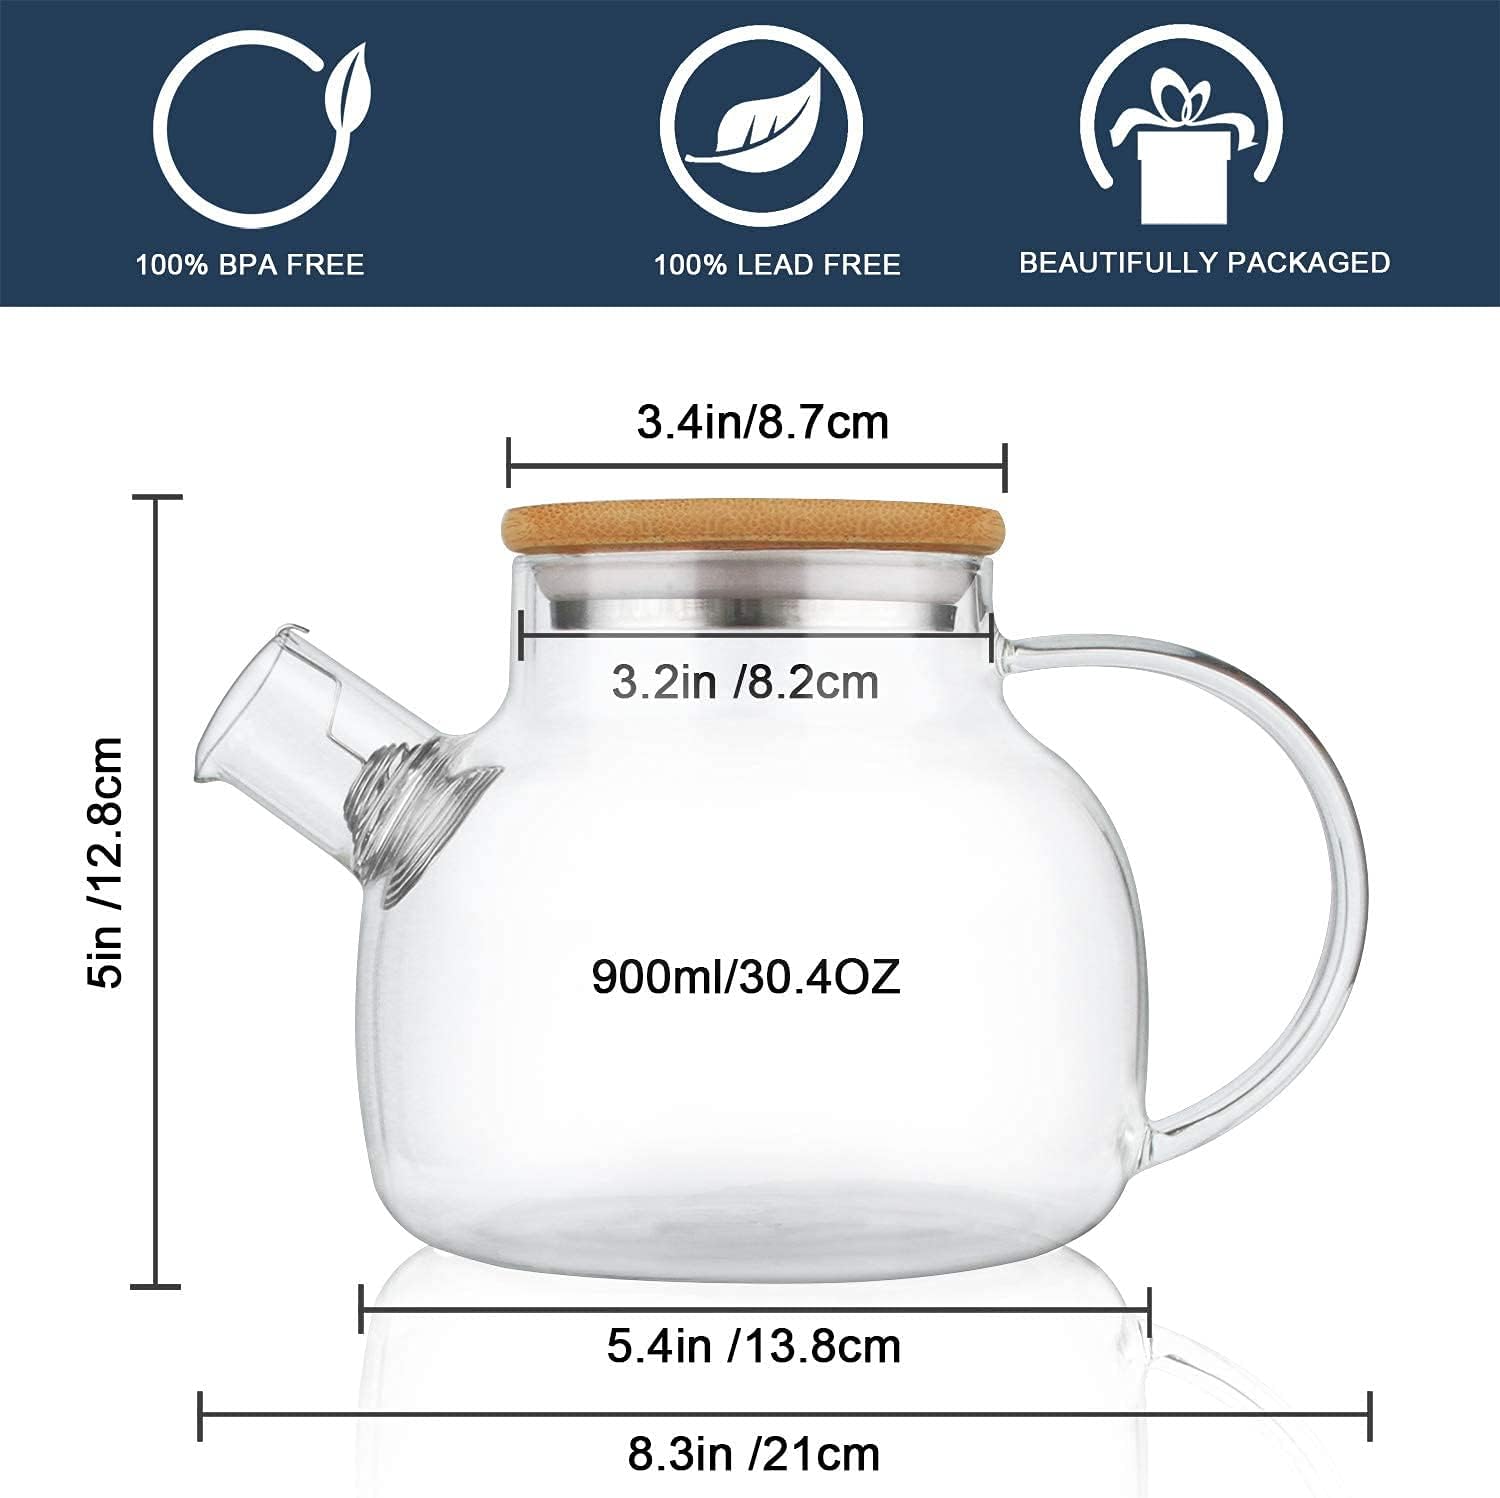 CnGlass Glass Teapot with Bamboo Lid, 900 ml/30.4 oz, Transparent Teapots with Removable Tea Strainer, Stove Top Safe Teapot for Loose Leaves and Blooming Tea, Blooming Tea Gift Set